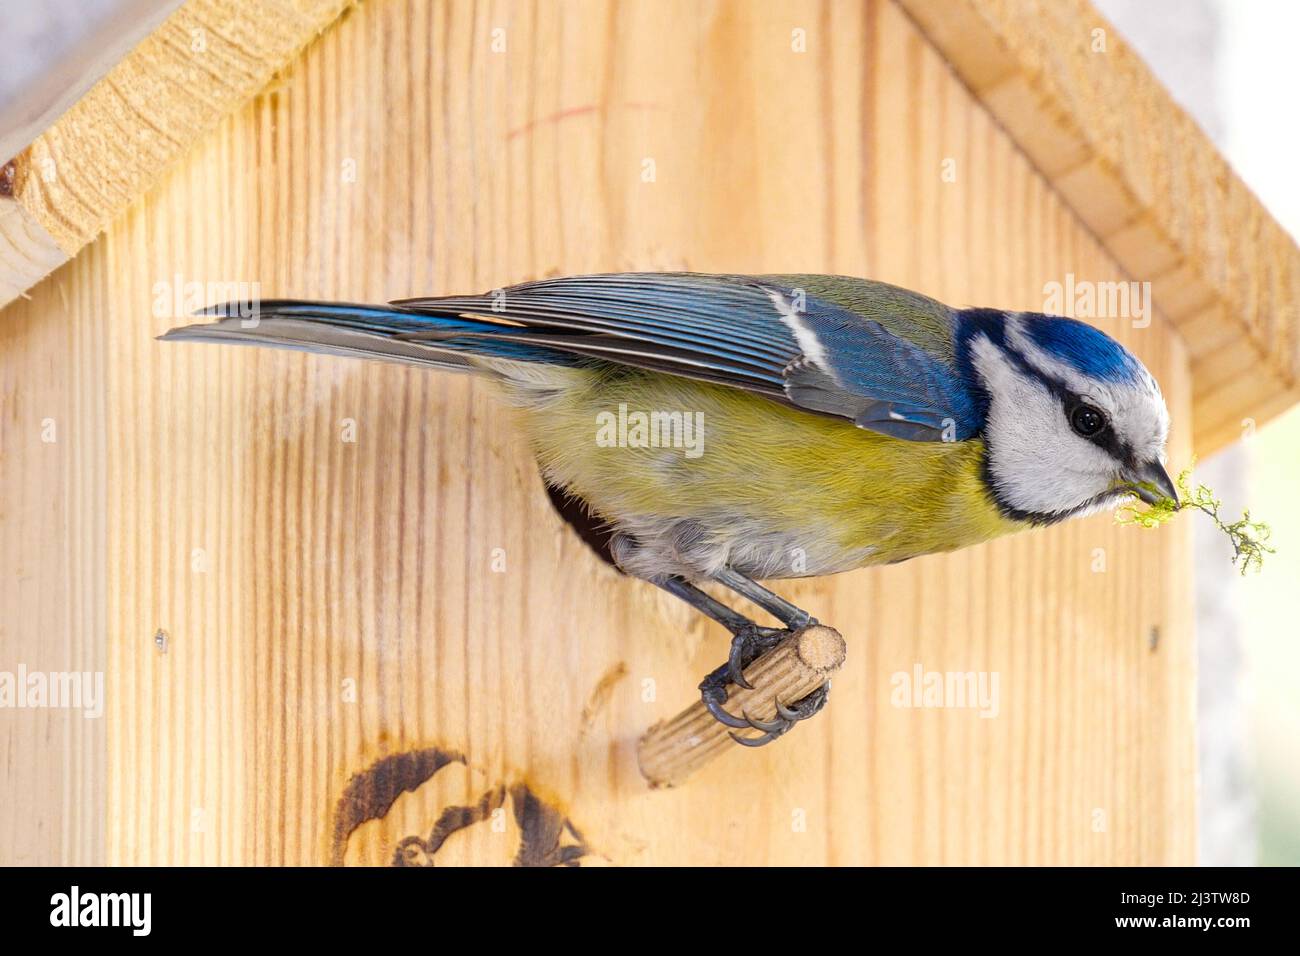 Blue tit builds a nest in the nest box. Couple of Eurasian blue tit preparing for brood, builds a nest of moss, close up view of bird. Stock Photo